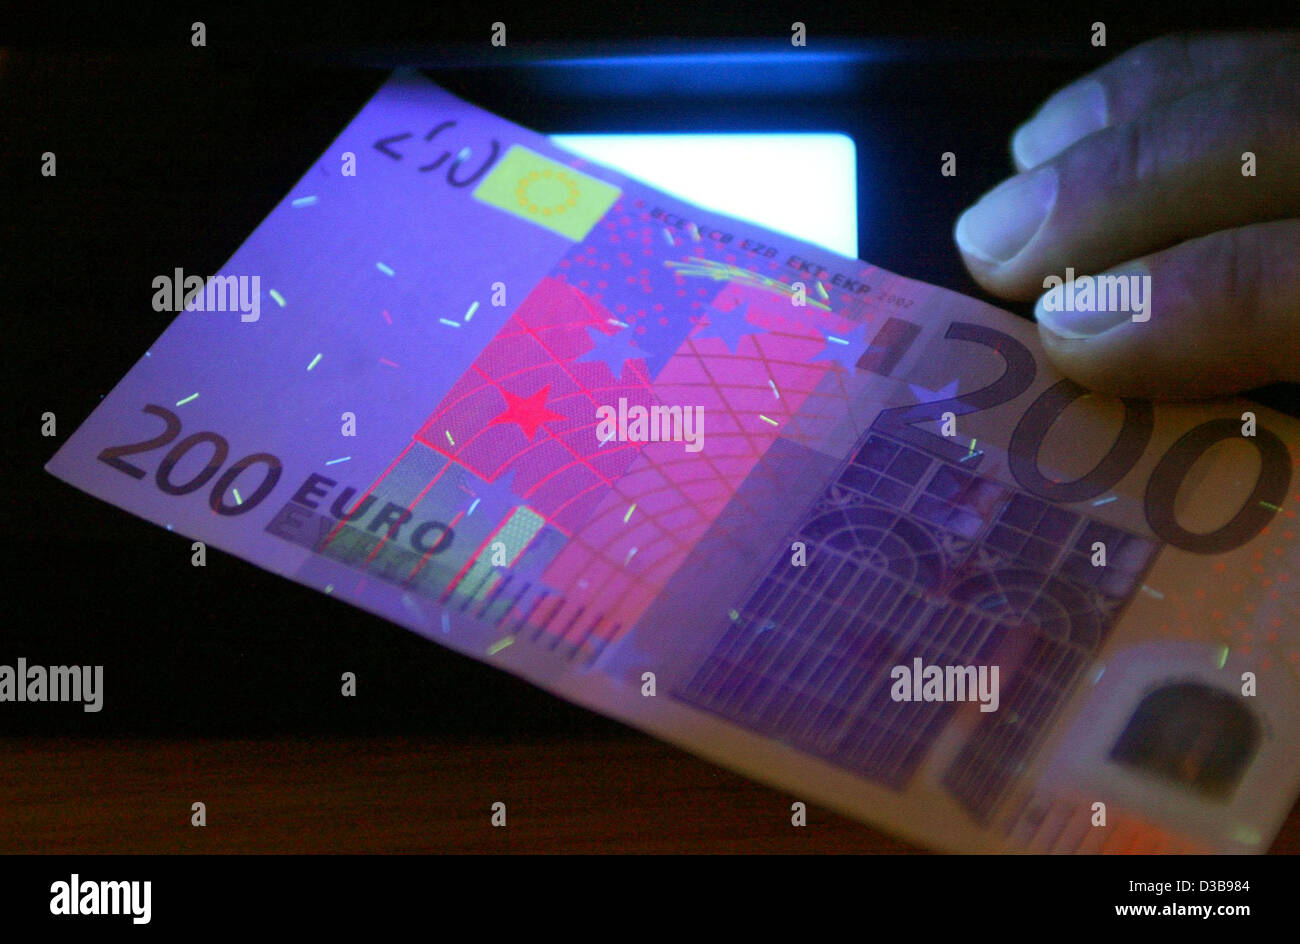 (dpa file) - The picture dated 30 November 2004 shows a counterfeited 200-euro bill under an ultraviolet lamp at a police station in Magdeburg, Germany. Stock Photo